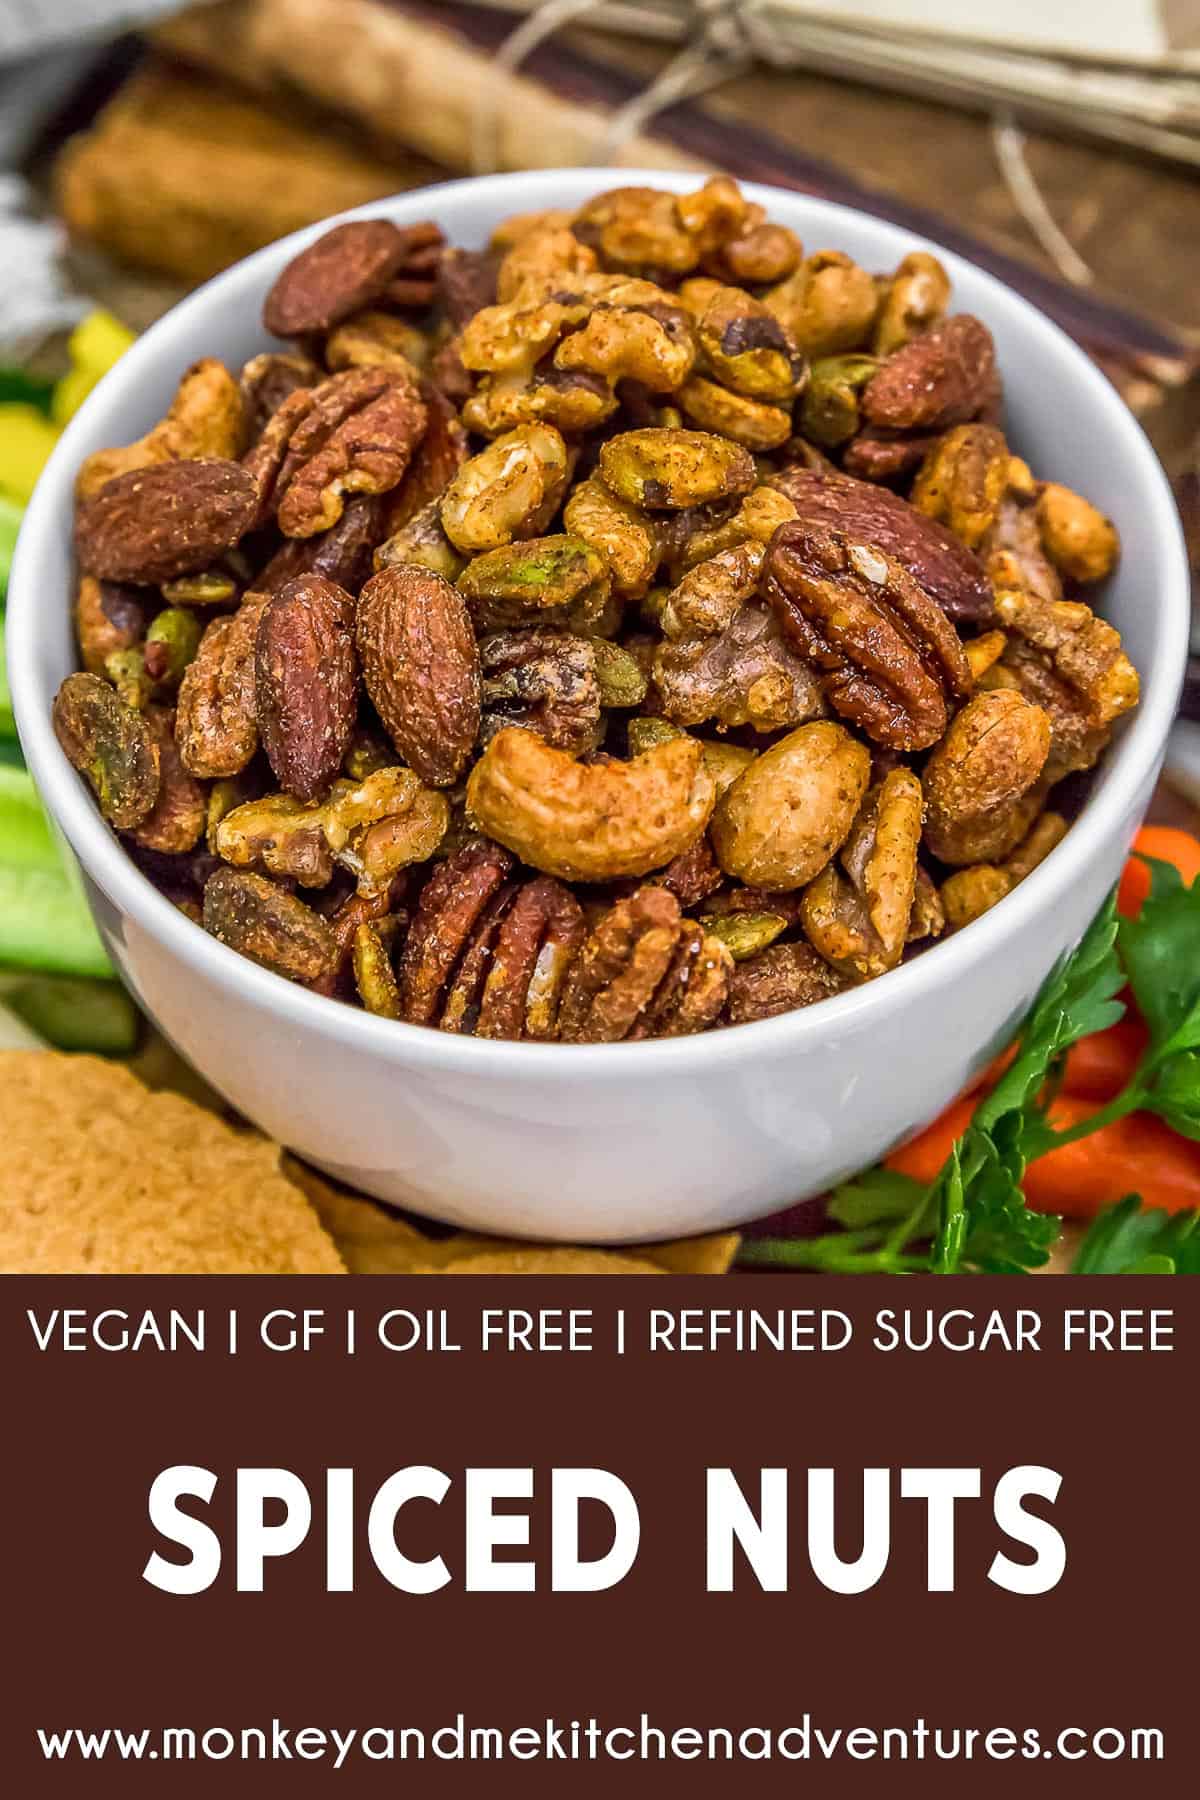 Oil Free Spiced Nuts with text description